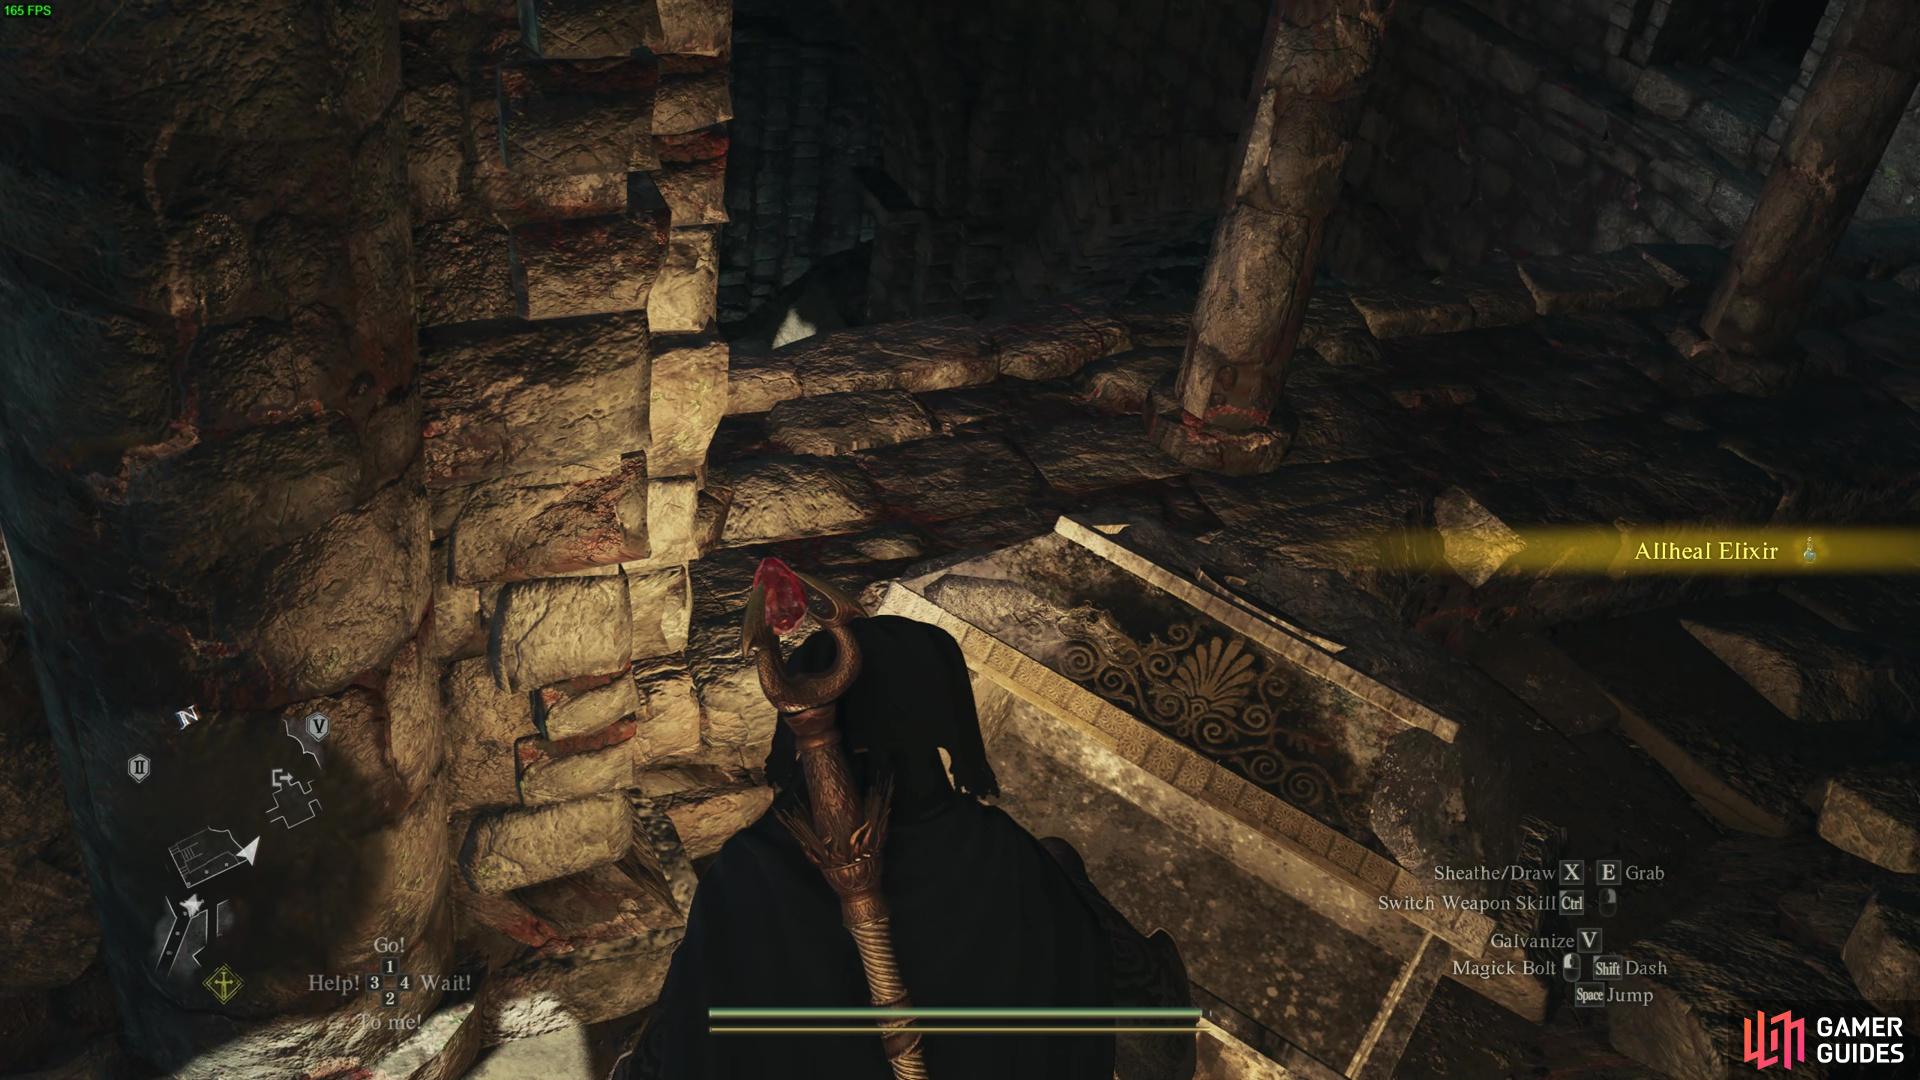 Saving the Allheal Elixirs for the post-game of Dragon’s Dogma 2 is an incredibly effective strategy.